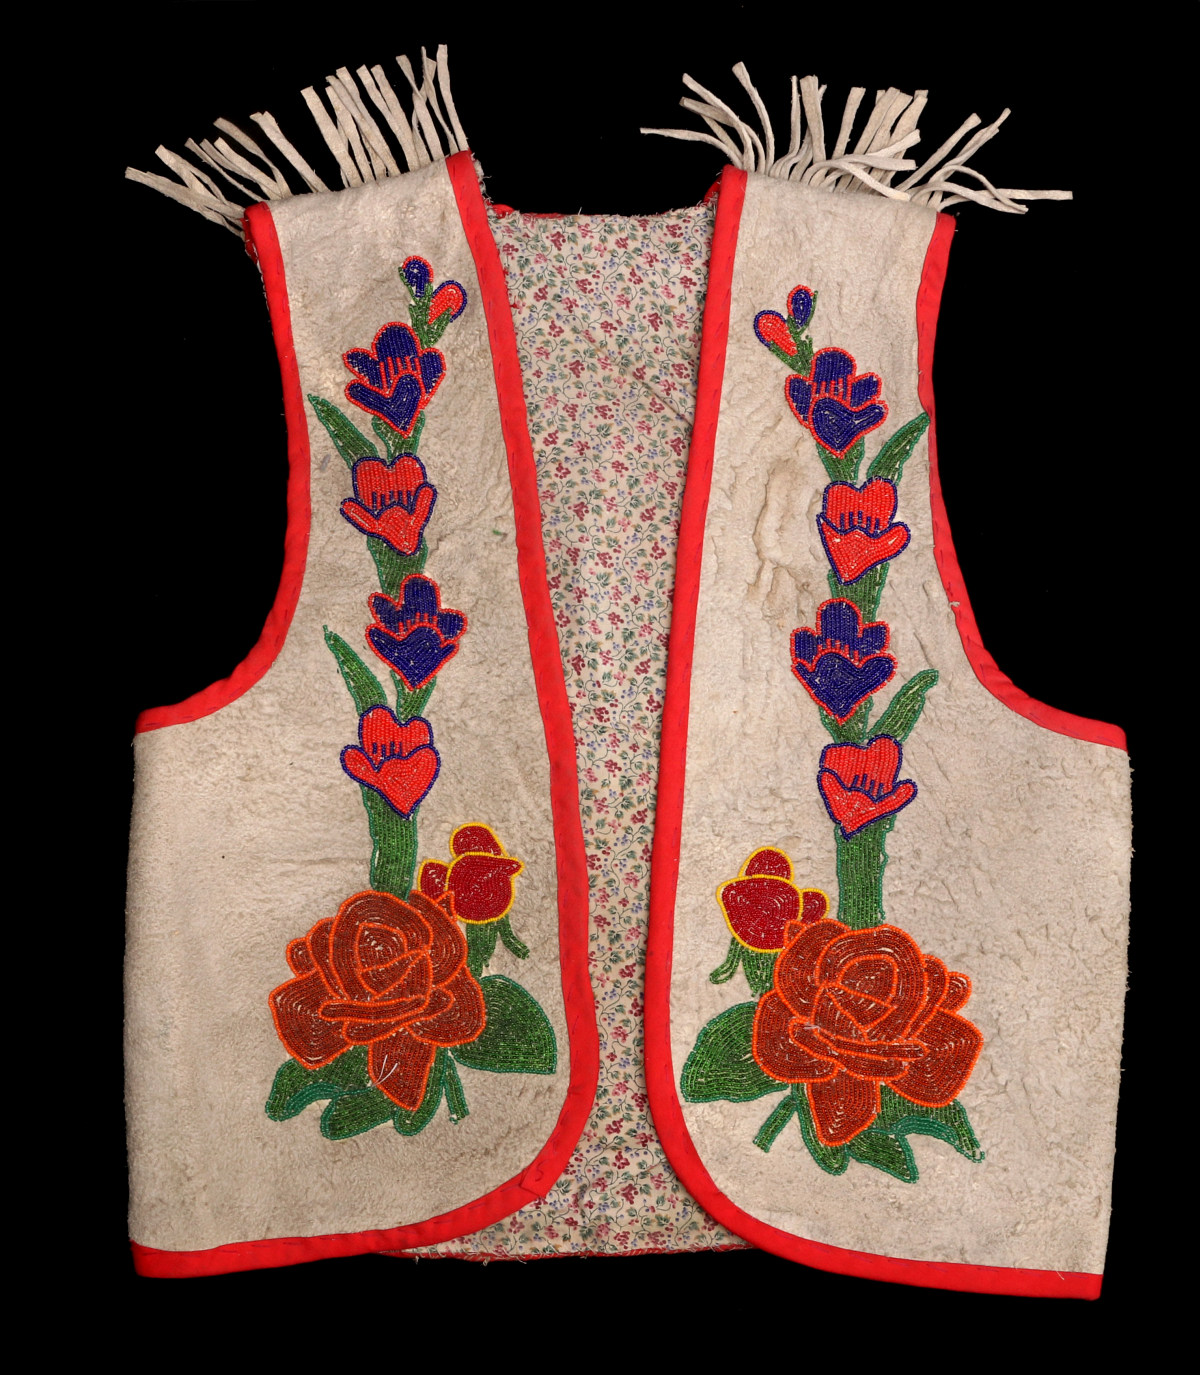 A LATE 20TH C. CHIPPEWA INDIAN BEADED CHILD'S VEST